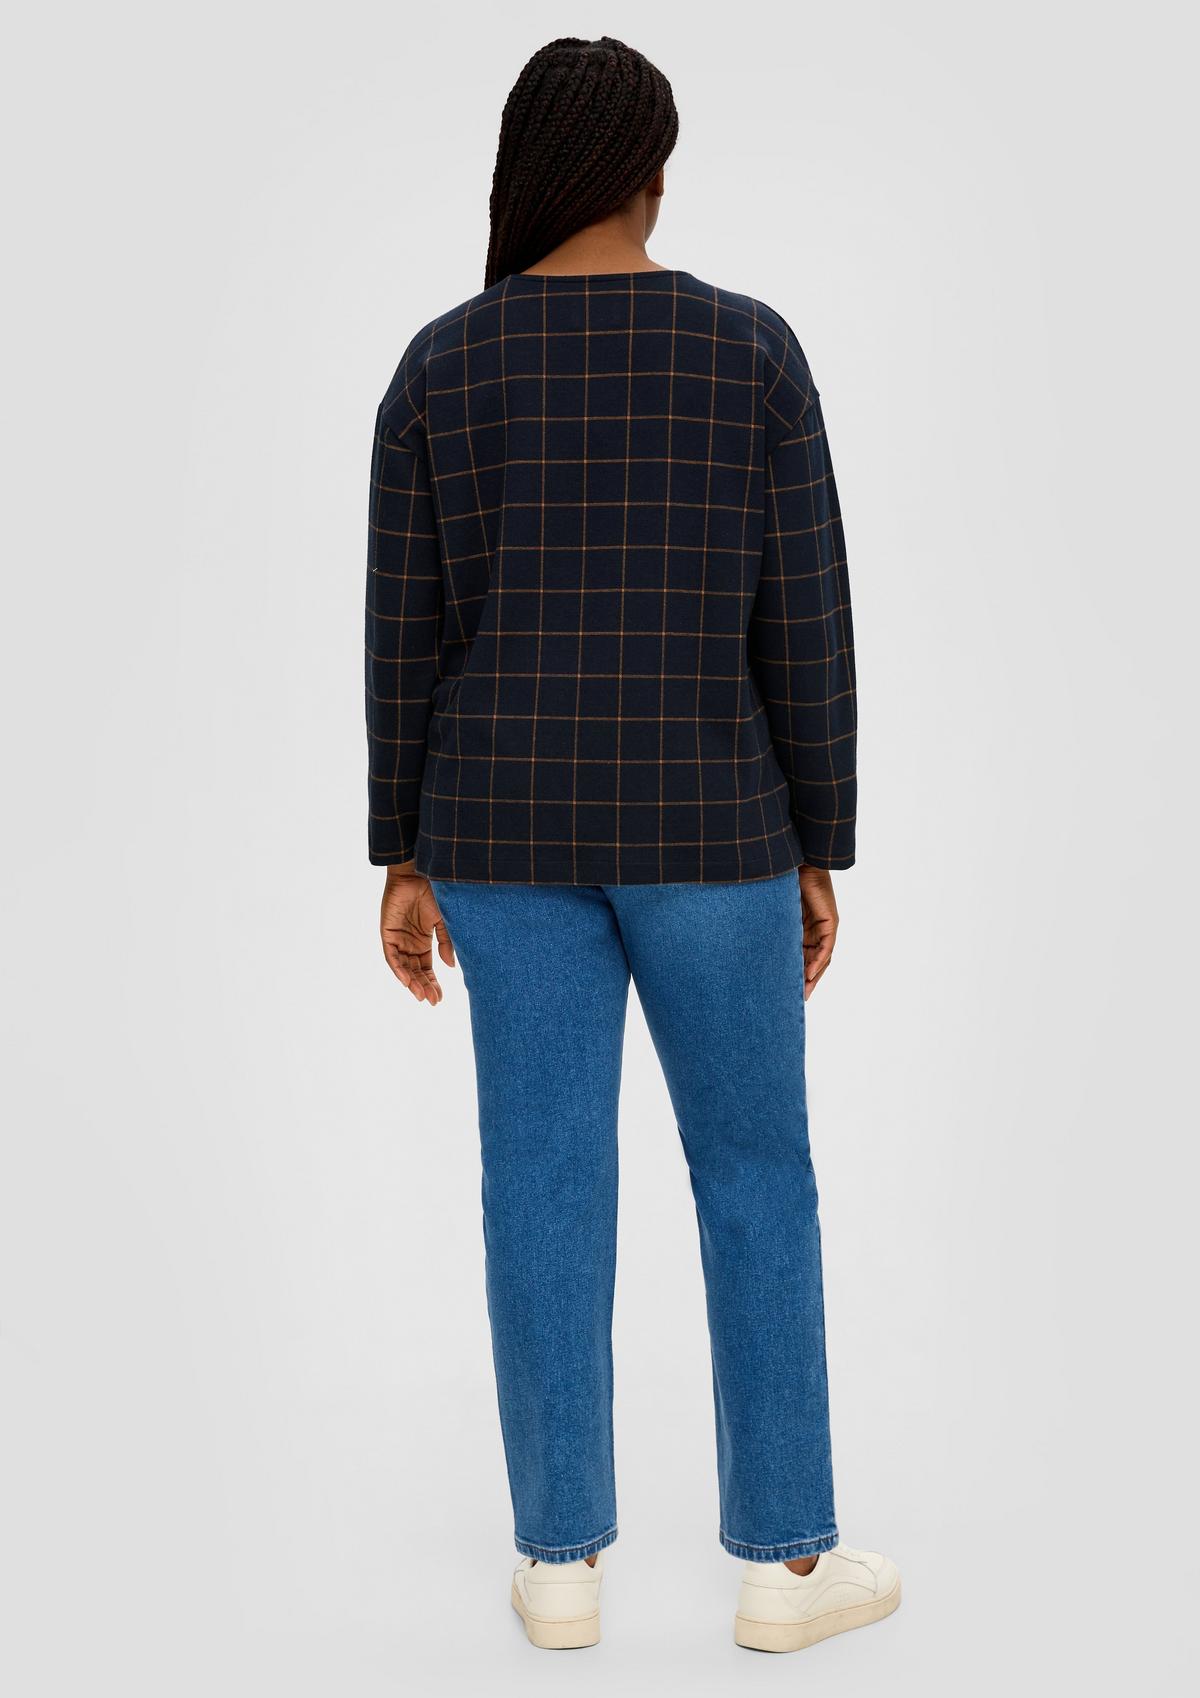 s.Oliver Sweatshirt with a knitted pattern